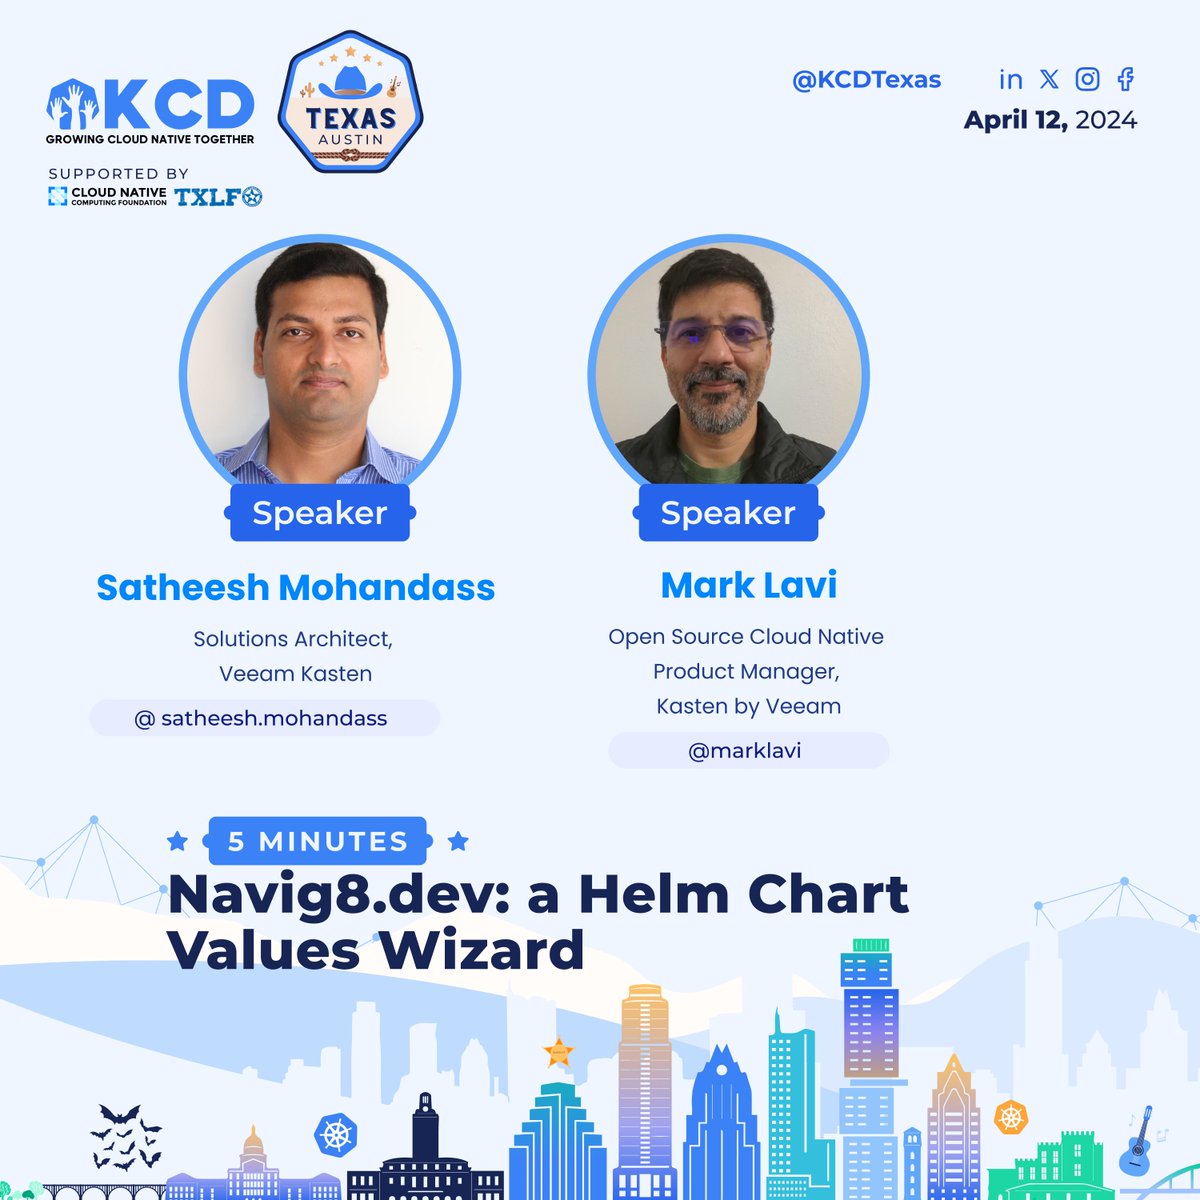 🚀 Join Mark Lavi, Principal Cloud Native Product Manager at Kasten by Veeam, as they dive into 'Navig8.dev: a Helm Chart Values Wizard' at KCD Texas! 🌟 🔗 texaskcd.com #KCDAustin #HelmCharts #OpenSource #OpenSource #KCDTexas #CNCF